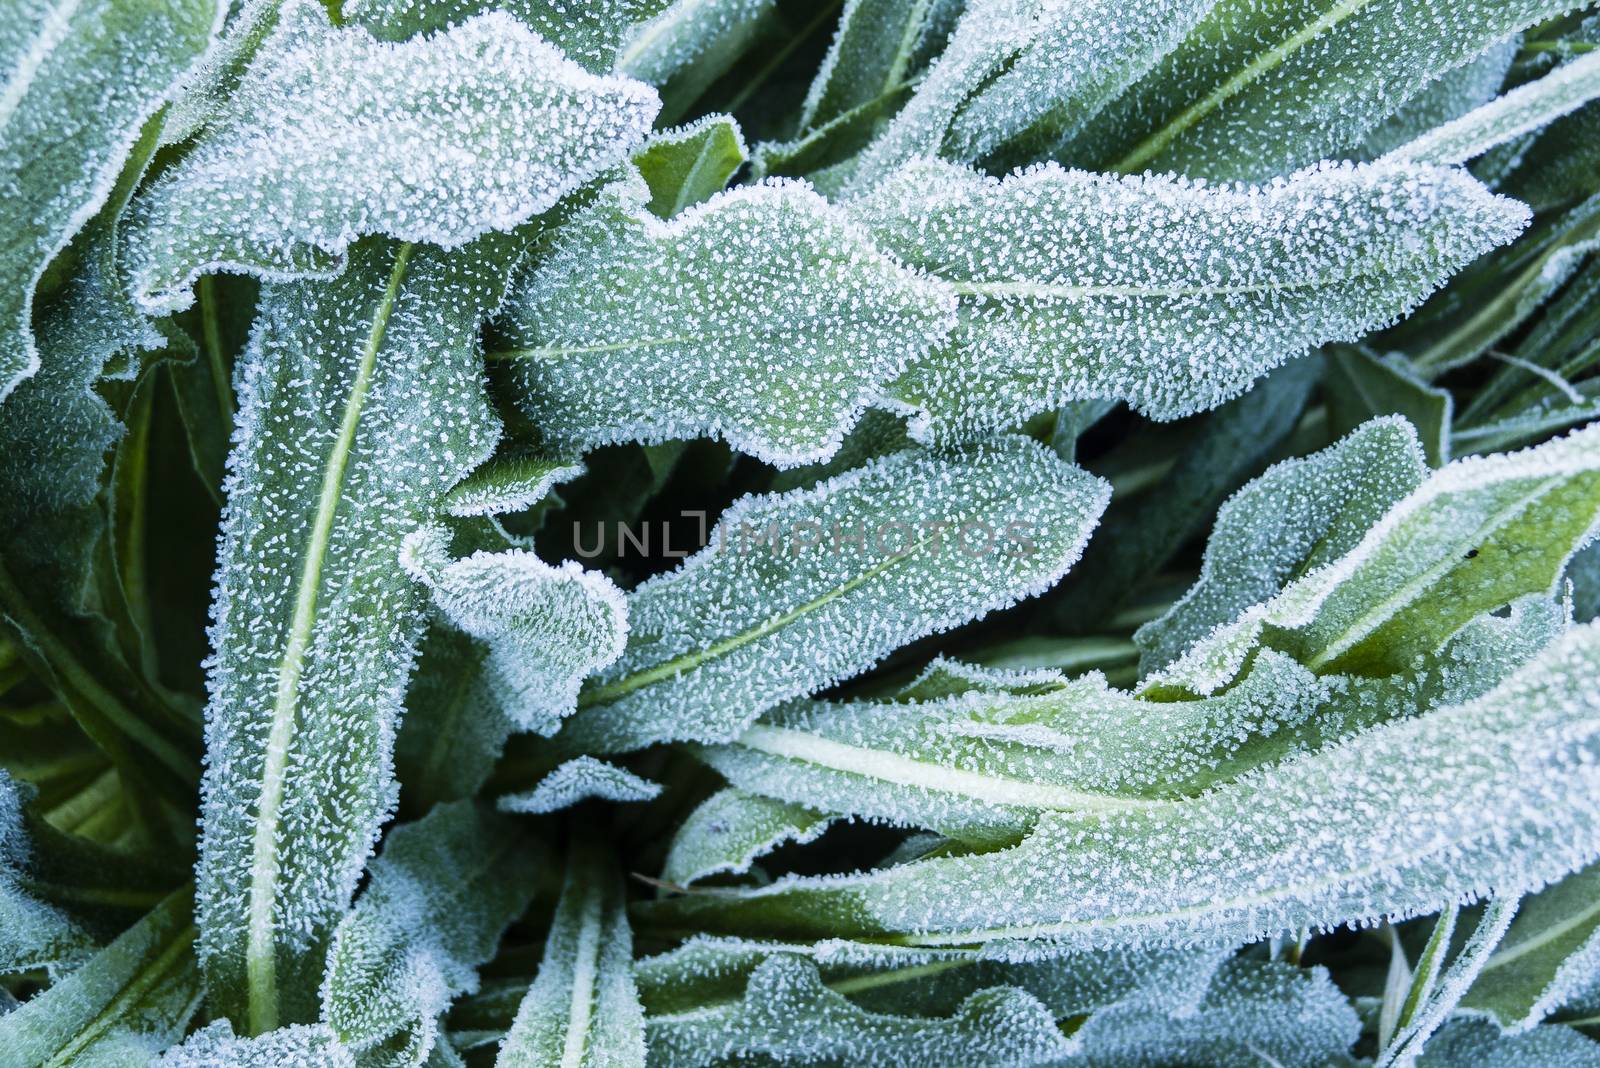 Close up of early morning frost on grass and leaves